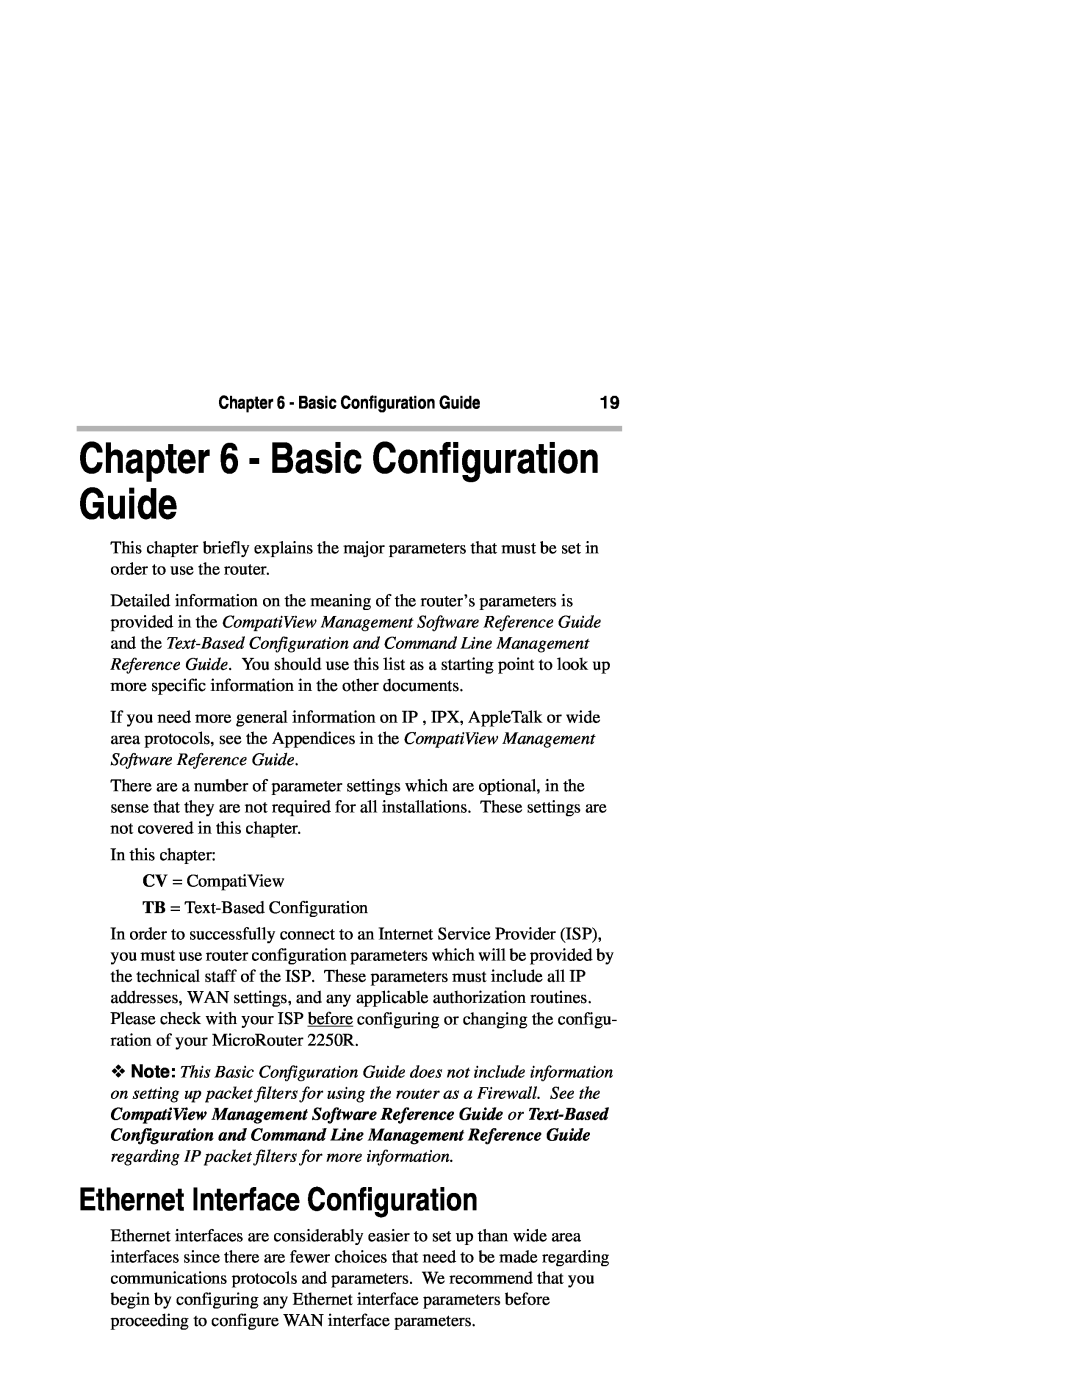 Compatible Systems 2250R manual Basic Configuration Guide, Ethernet Interface Configuration 